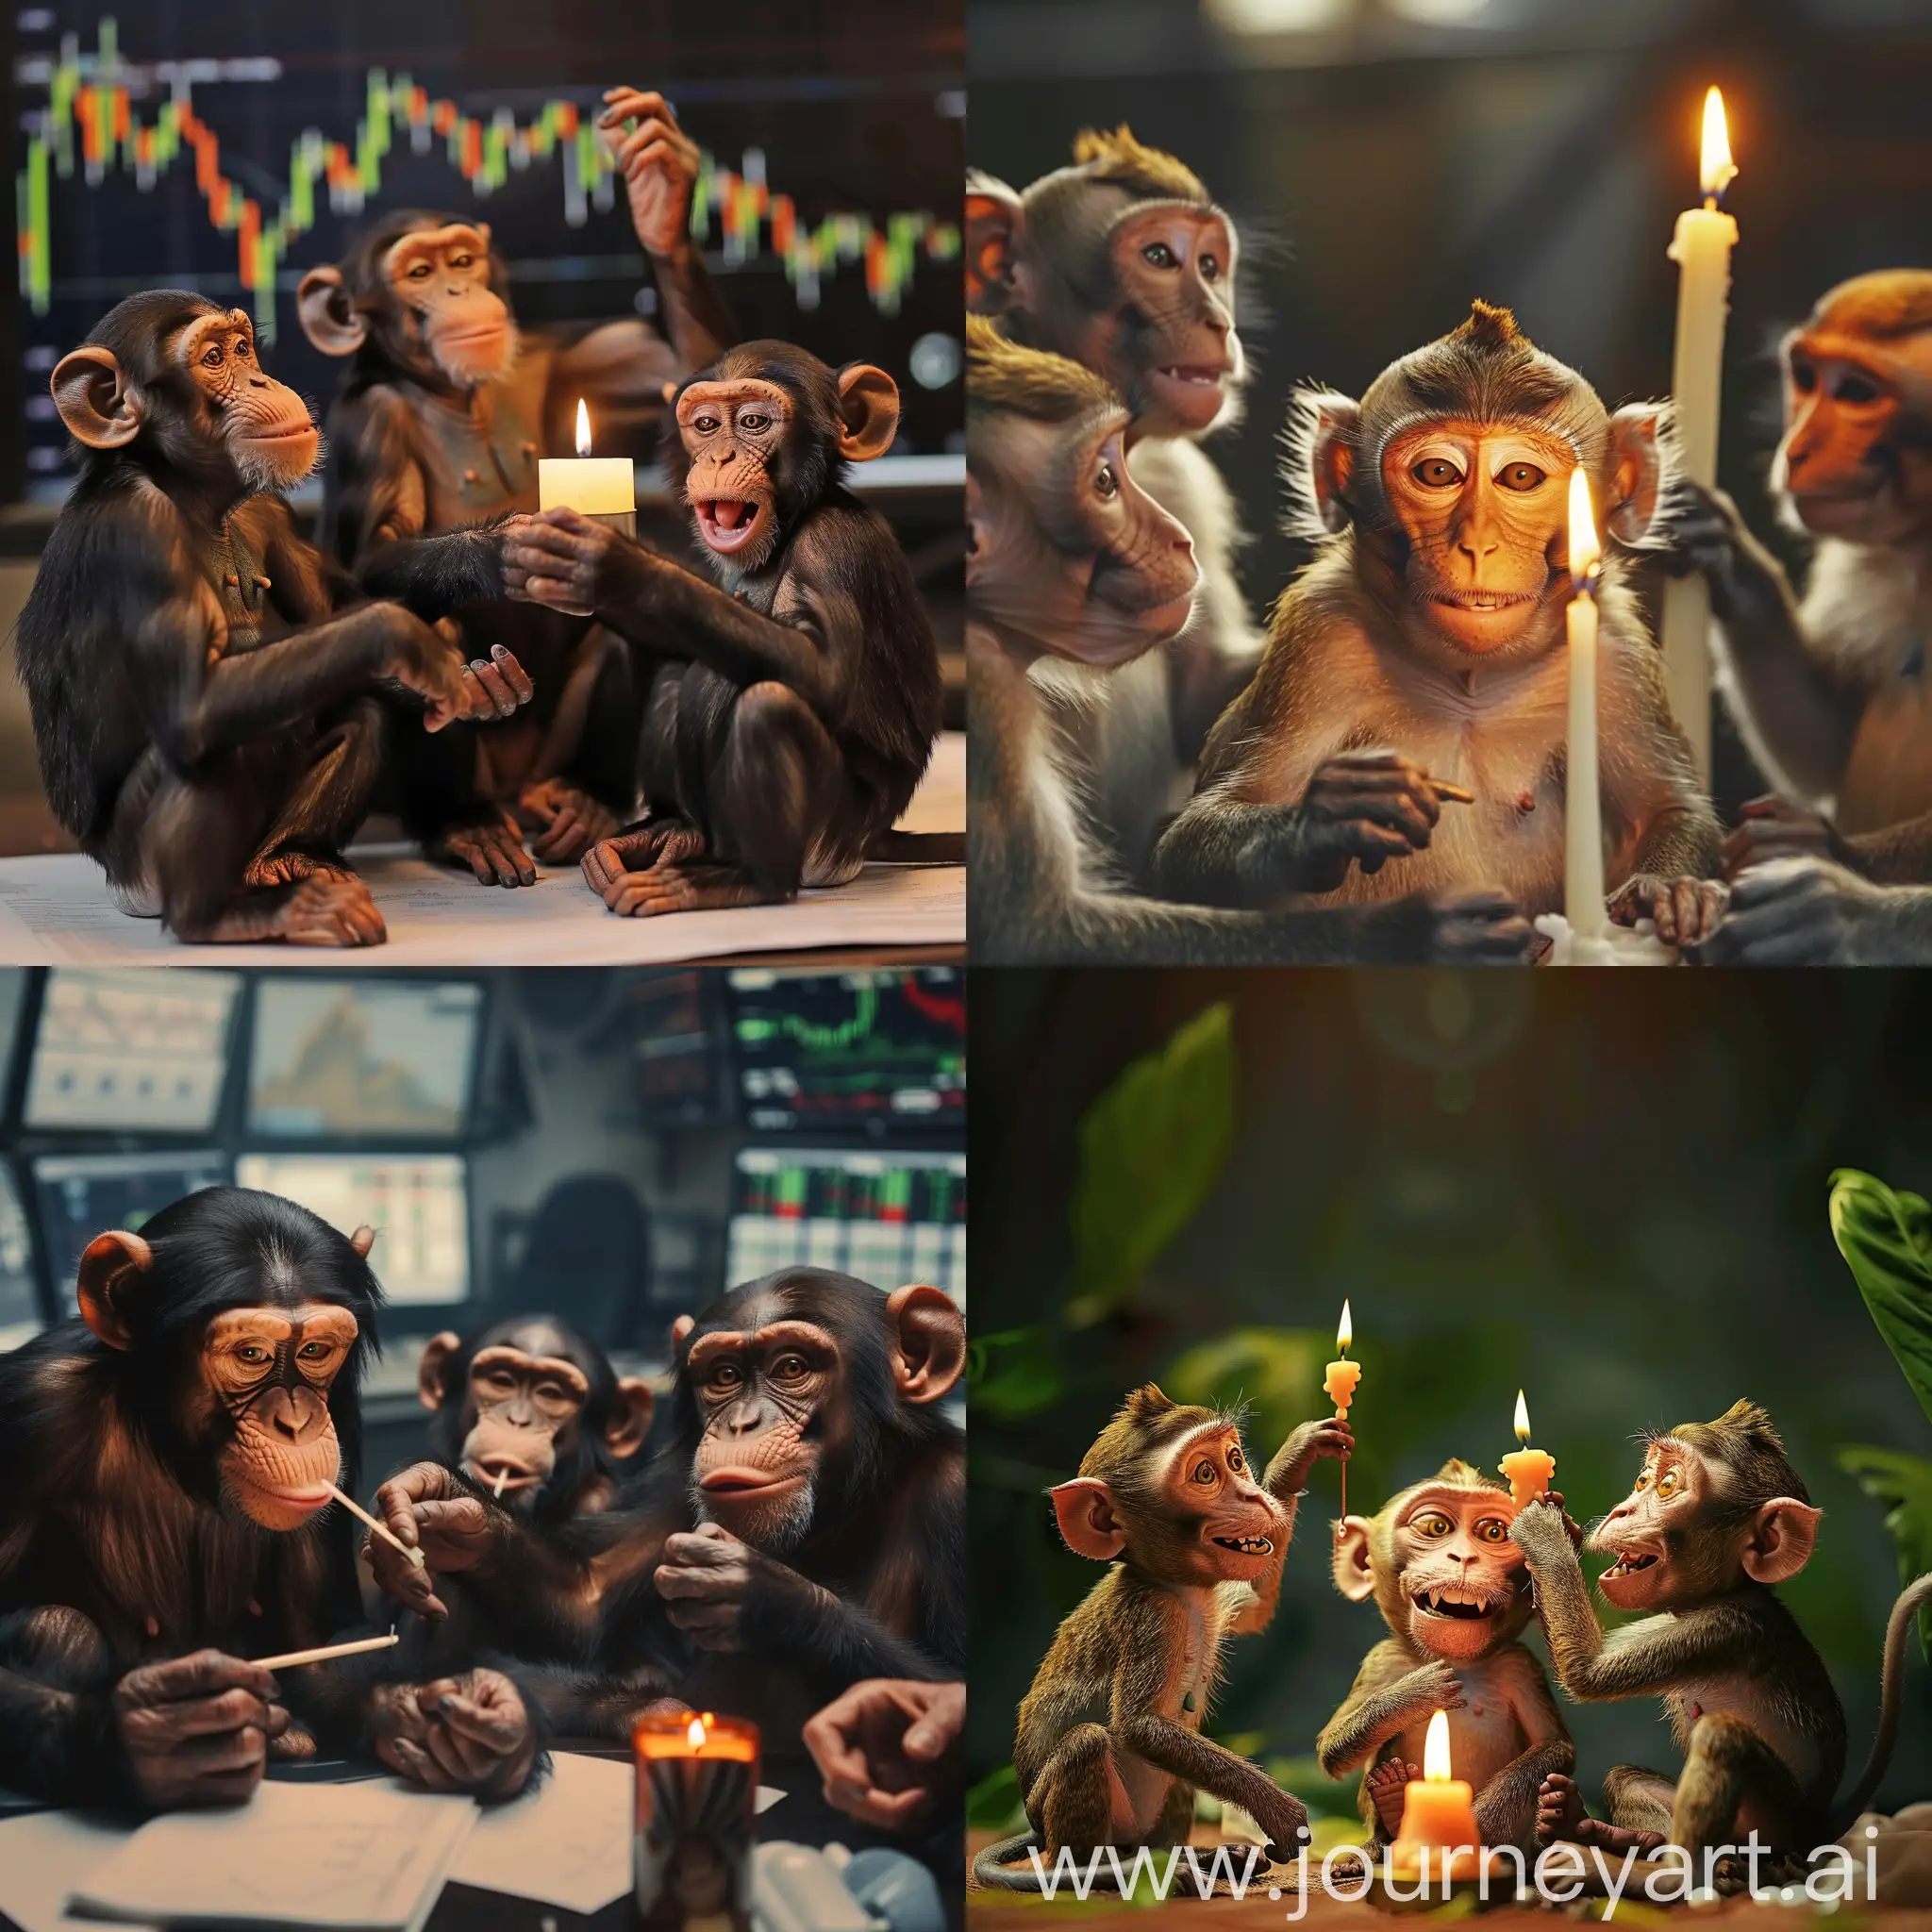 Joyful-Monkeys-Engage-in-Stock-Trading-with-Divine-Candle